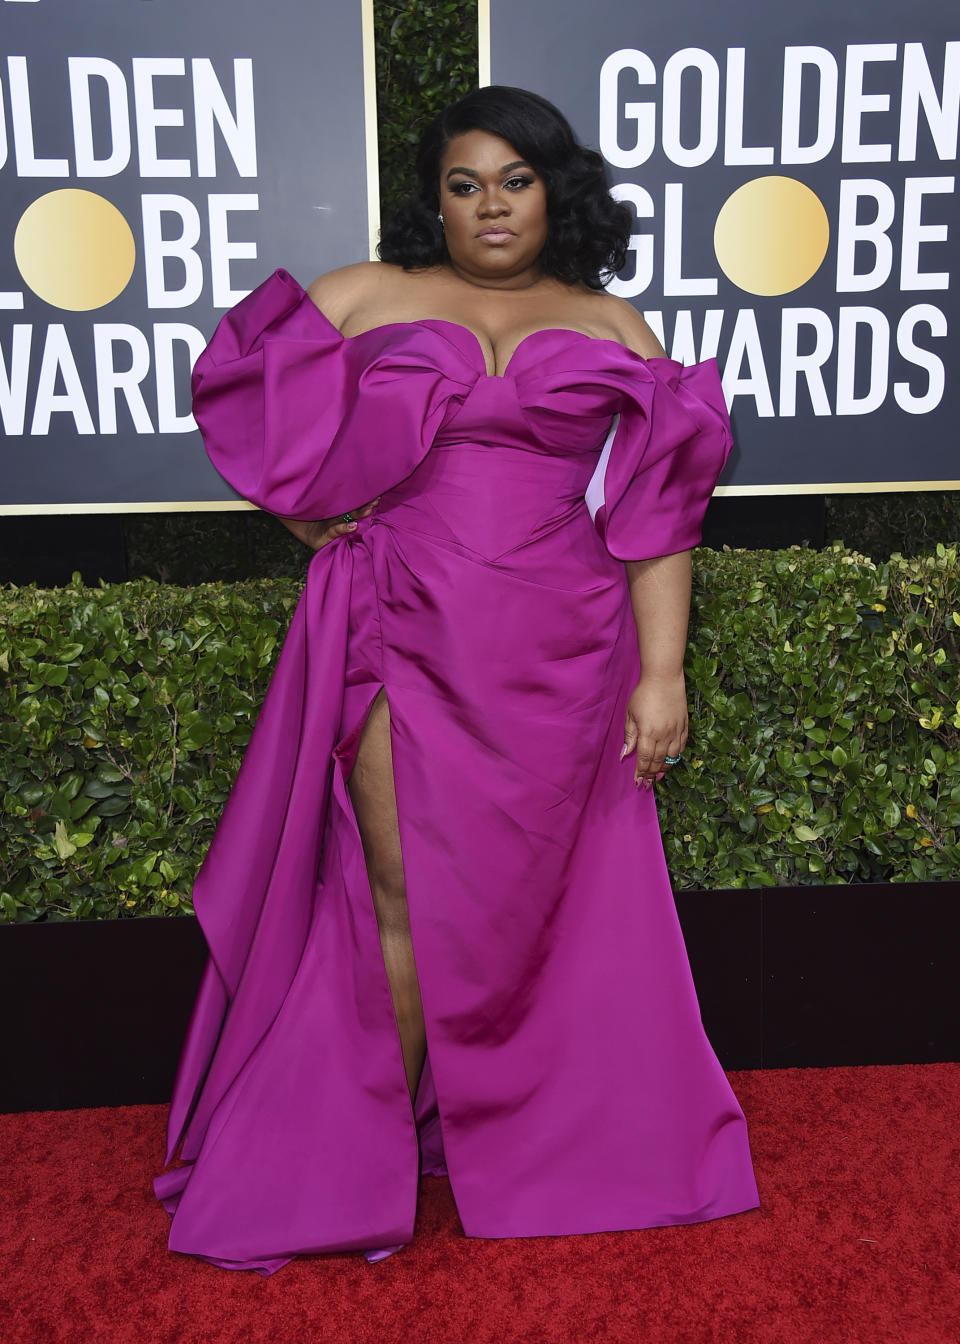 Da'Vine Joy Randolph arrives at the 77th annual Golden Globe Awards at the Beverly Hilton Hotel on Sunday, Jan. 5, 2020, in Beverly Hills, Calif. (Photo by Jordan Strauss/Invision/AP)